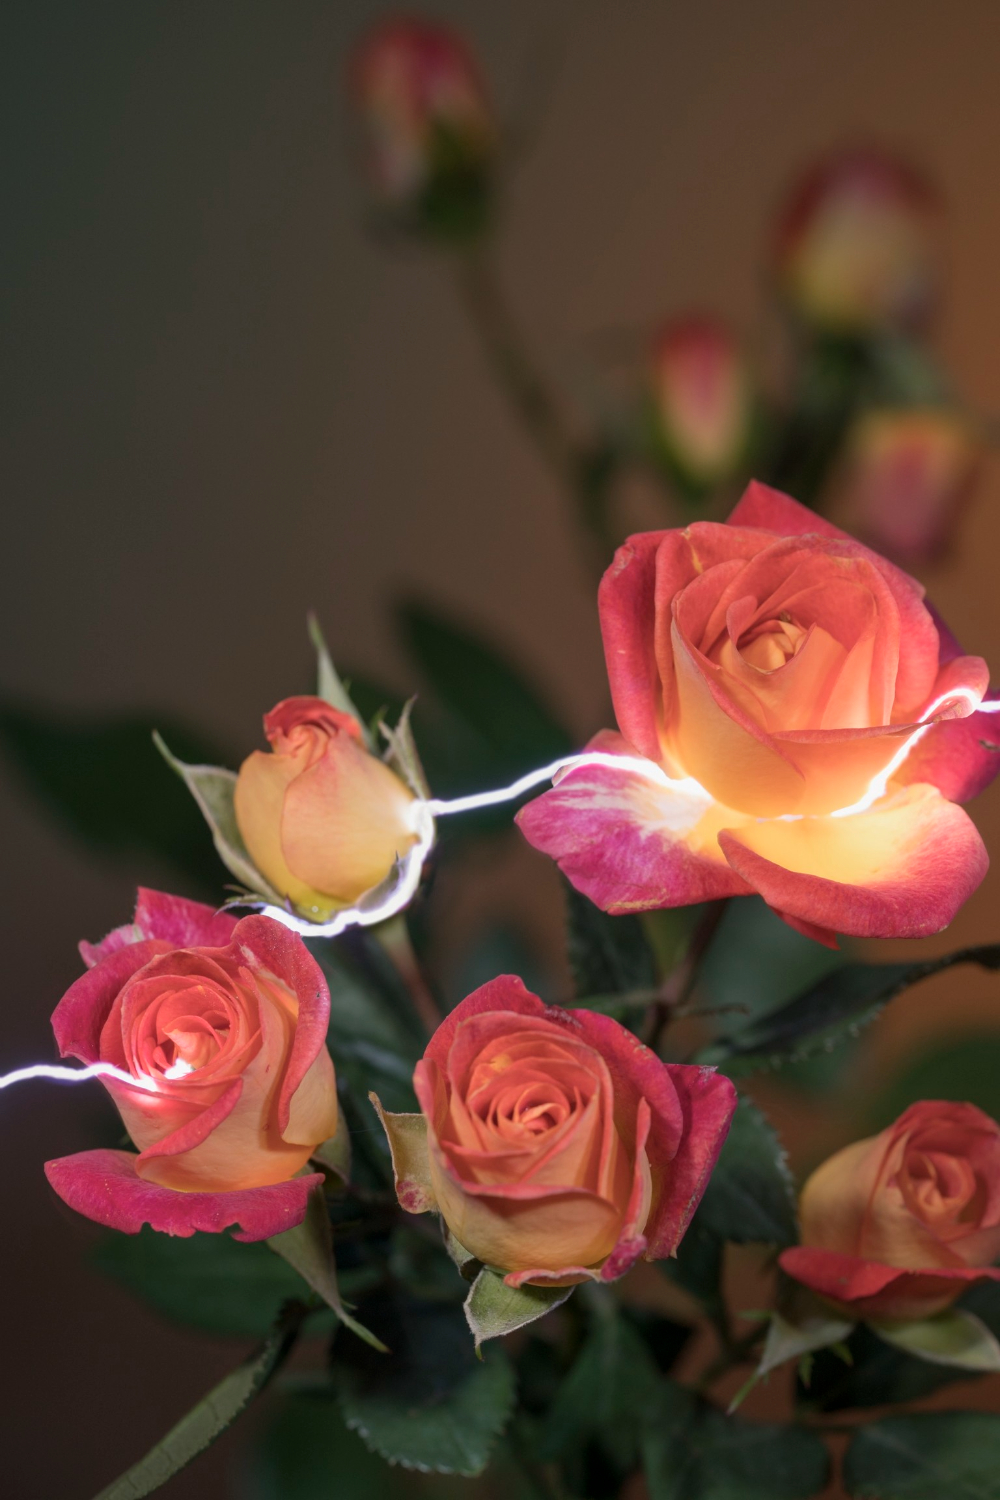 Hu Weiyi Lights Up Flowers With Electricity Electrically charged roses by Hu Weiyi